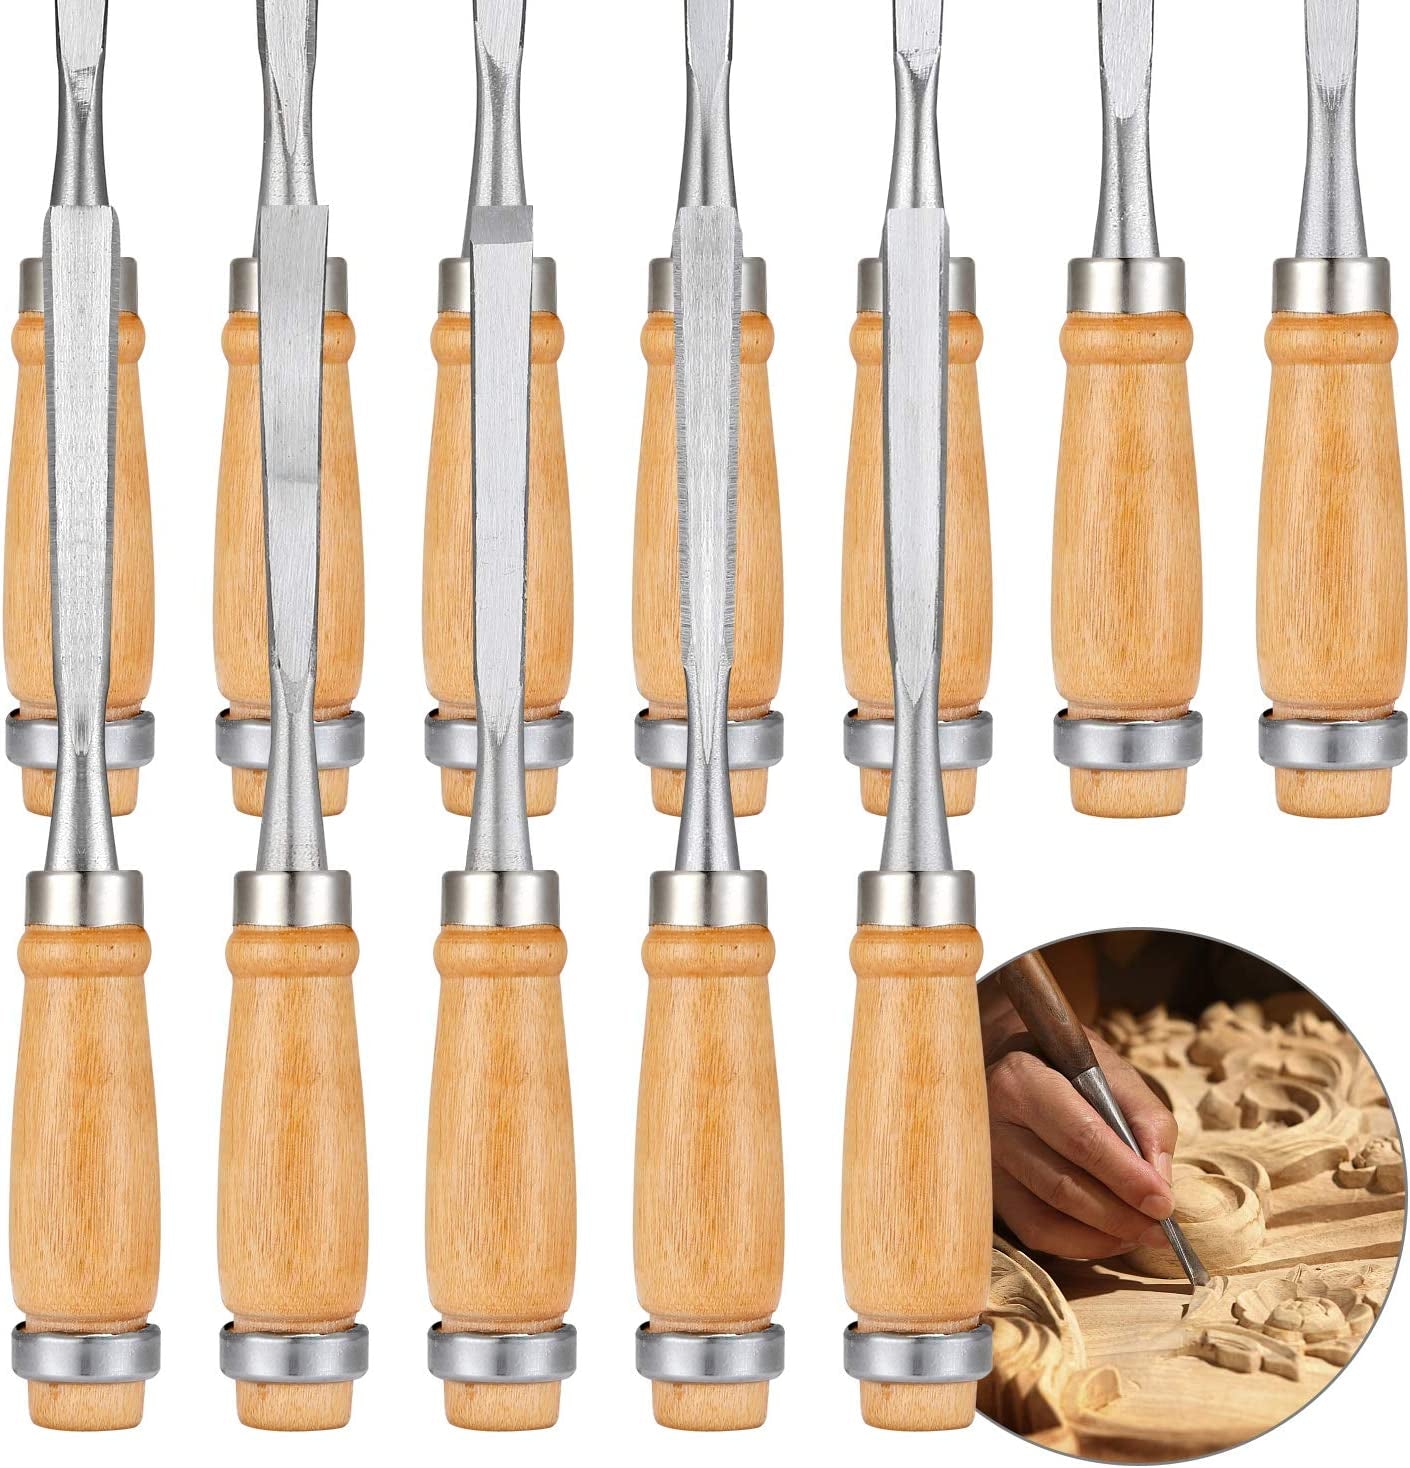 24Pcs Wood Carving Chisel Set Wood Carving Kit Including Small and Large Size Wood Carver Set